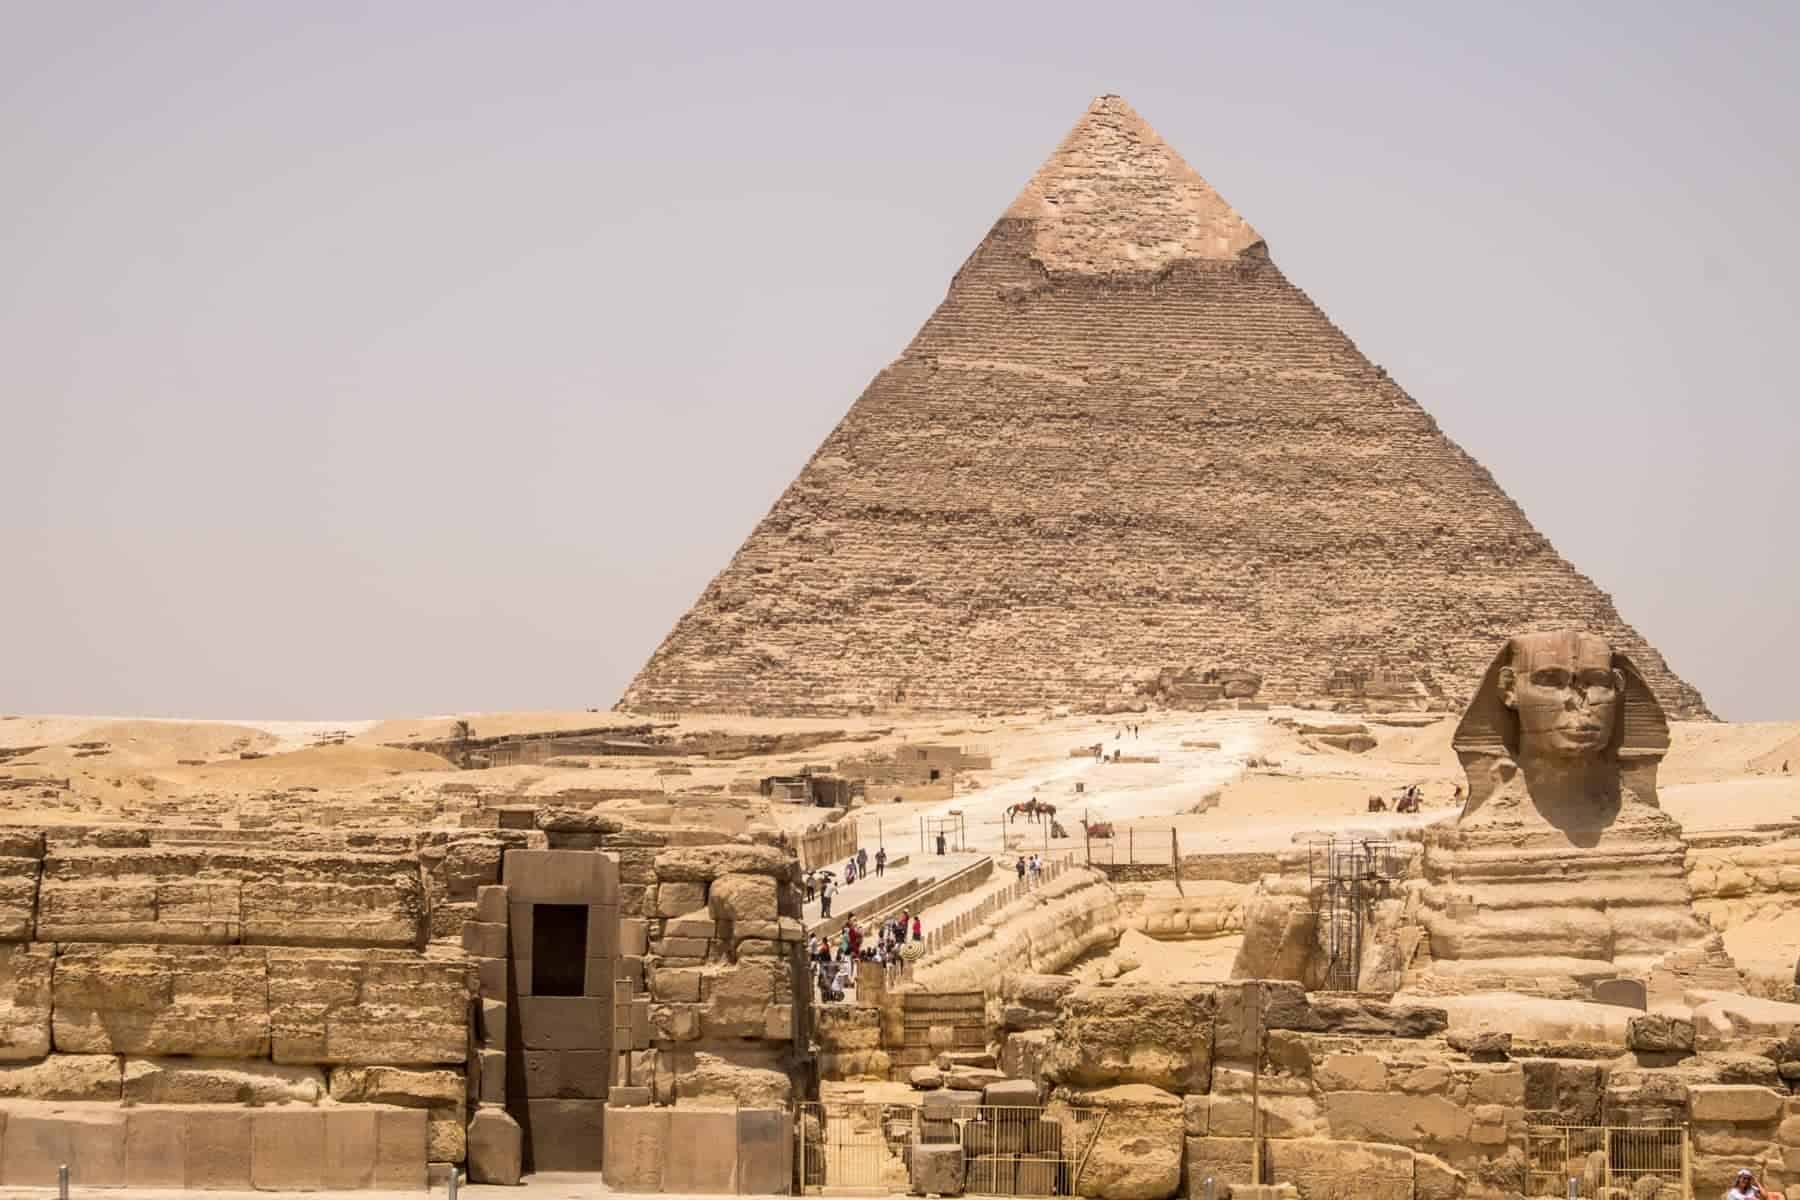 A great pyramid of Giza looms behind the sphinx in the dusty desert area of Giza in Egypt.